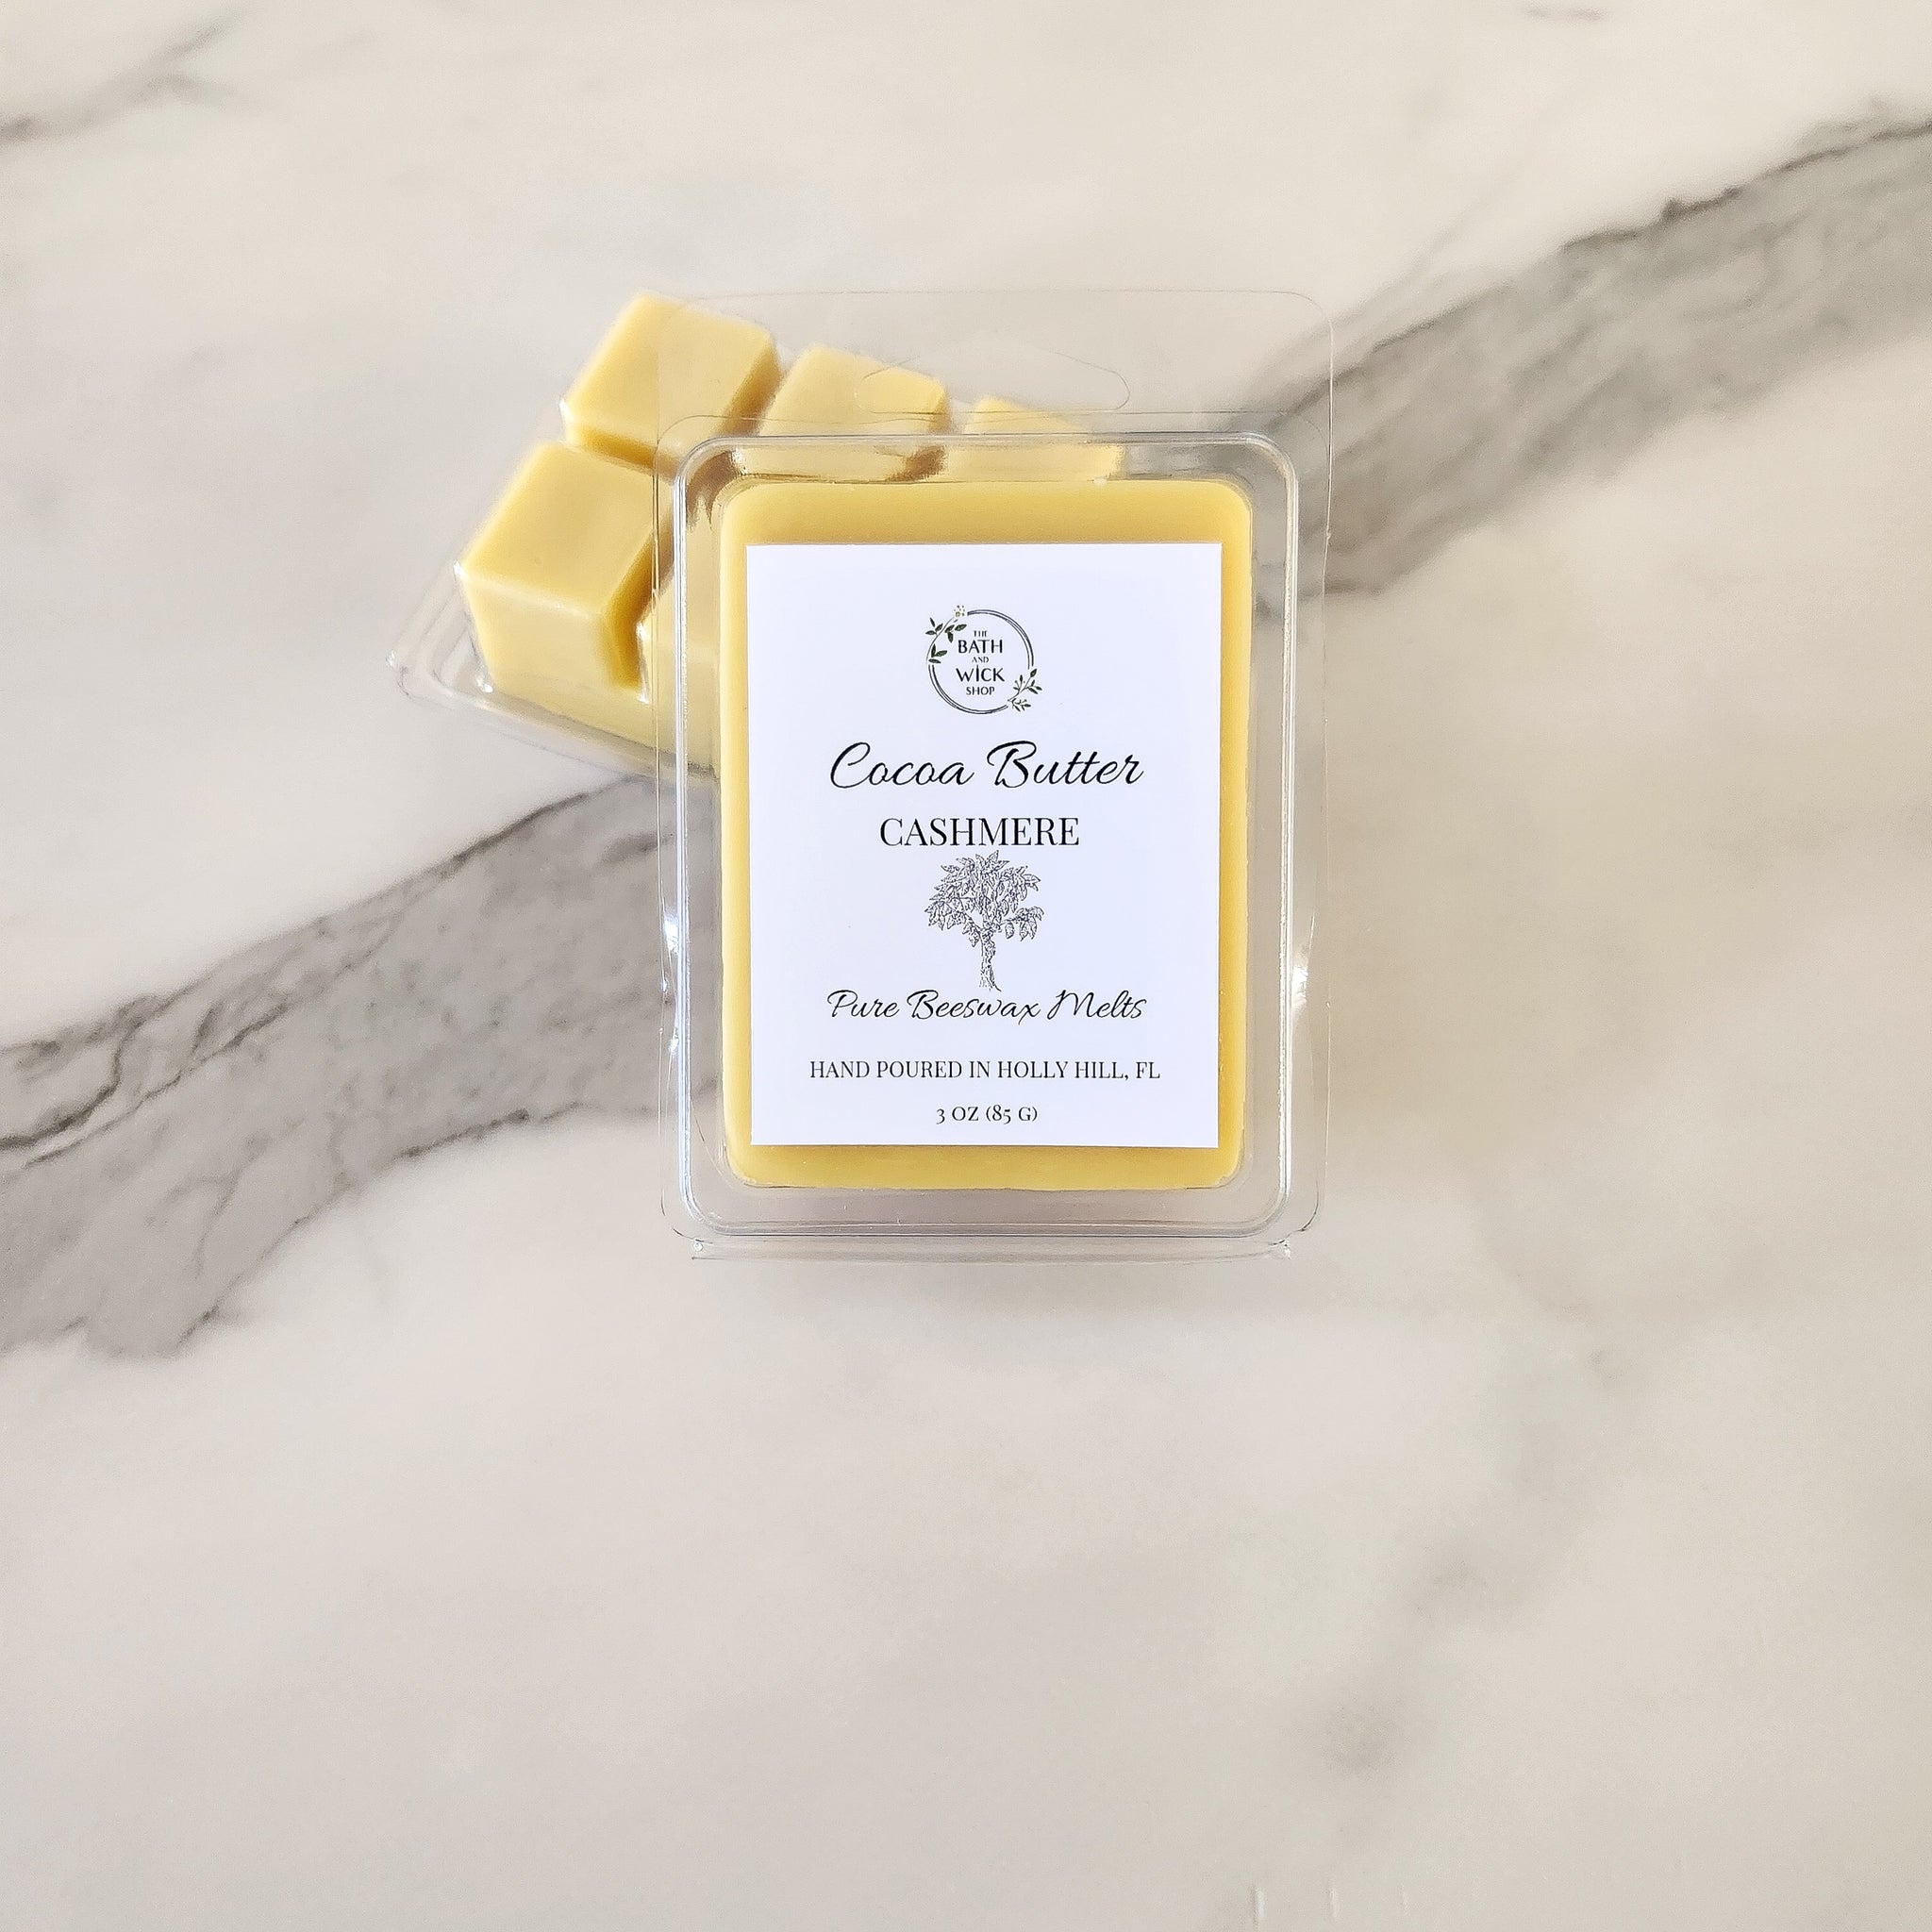 Cocoa Butter Cashmere Pure Beeswax Melts